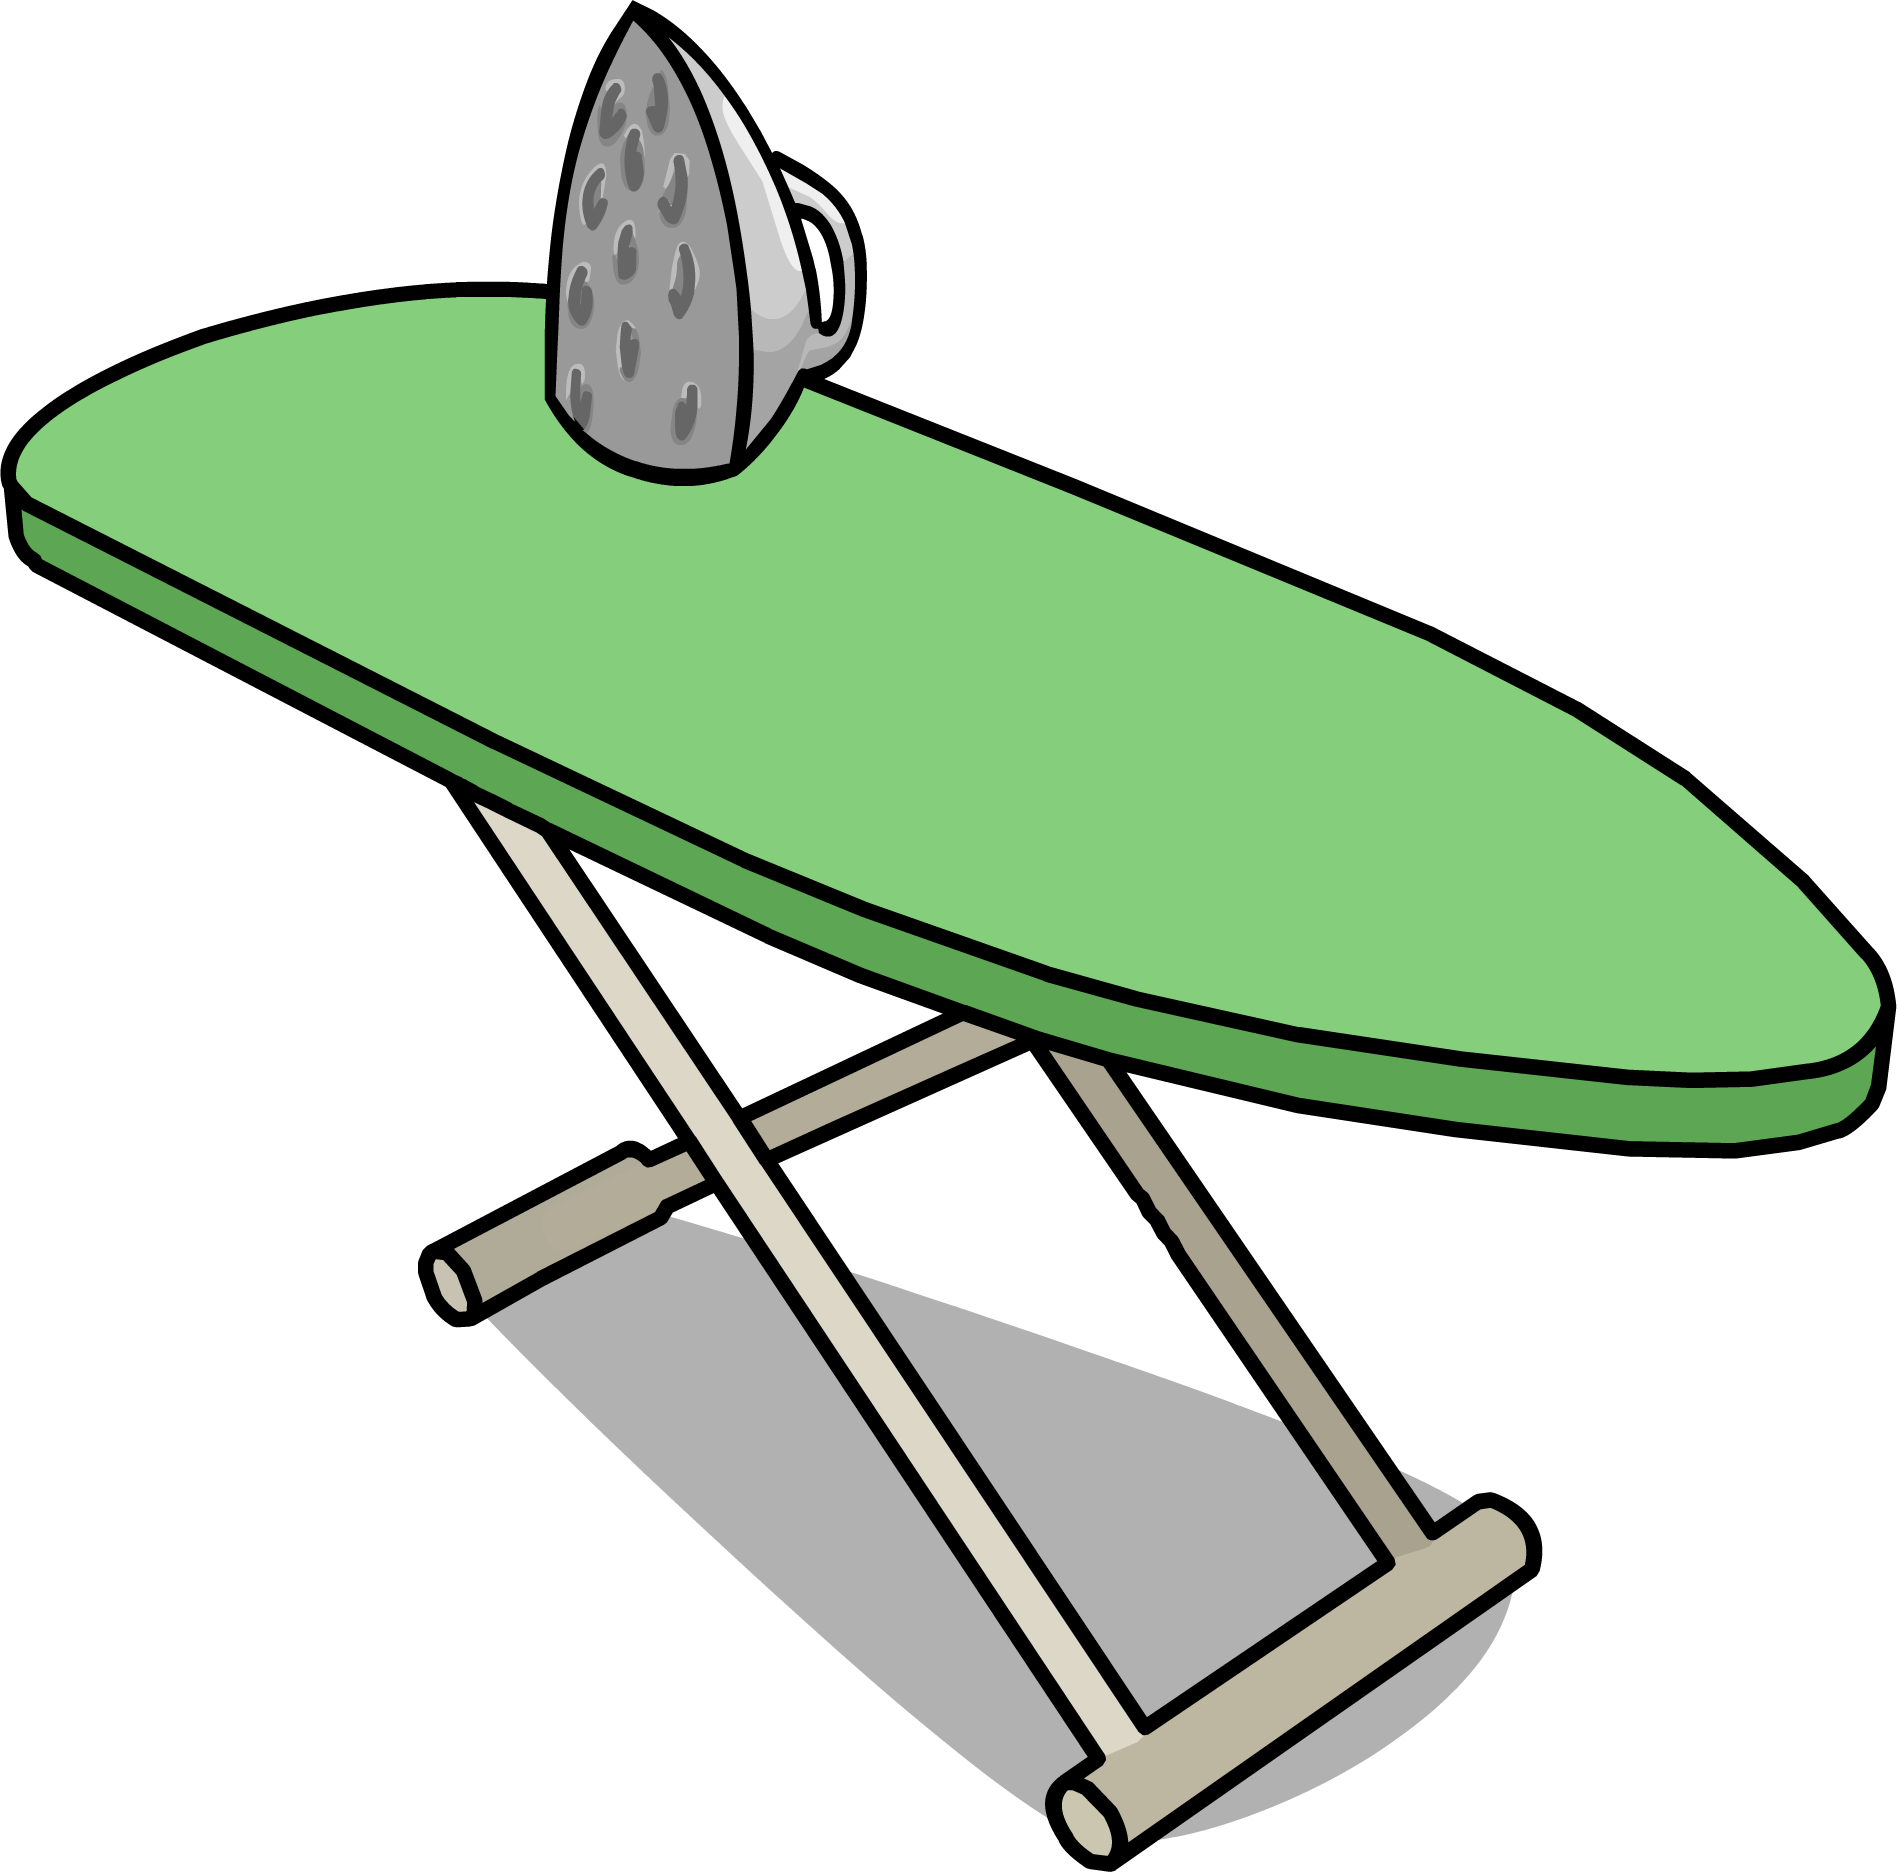 Ironing Board Sprite 004 - Ironing Board Clipart (1897x1872)